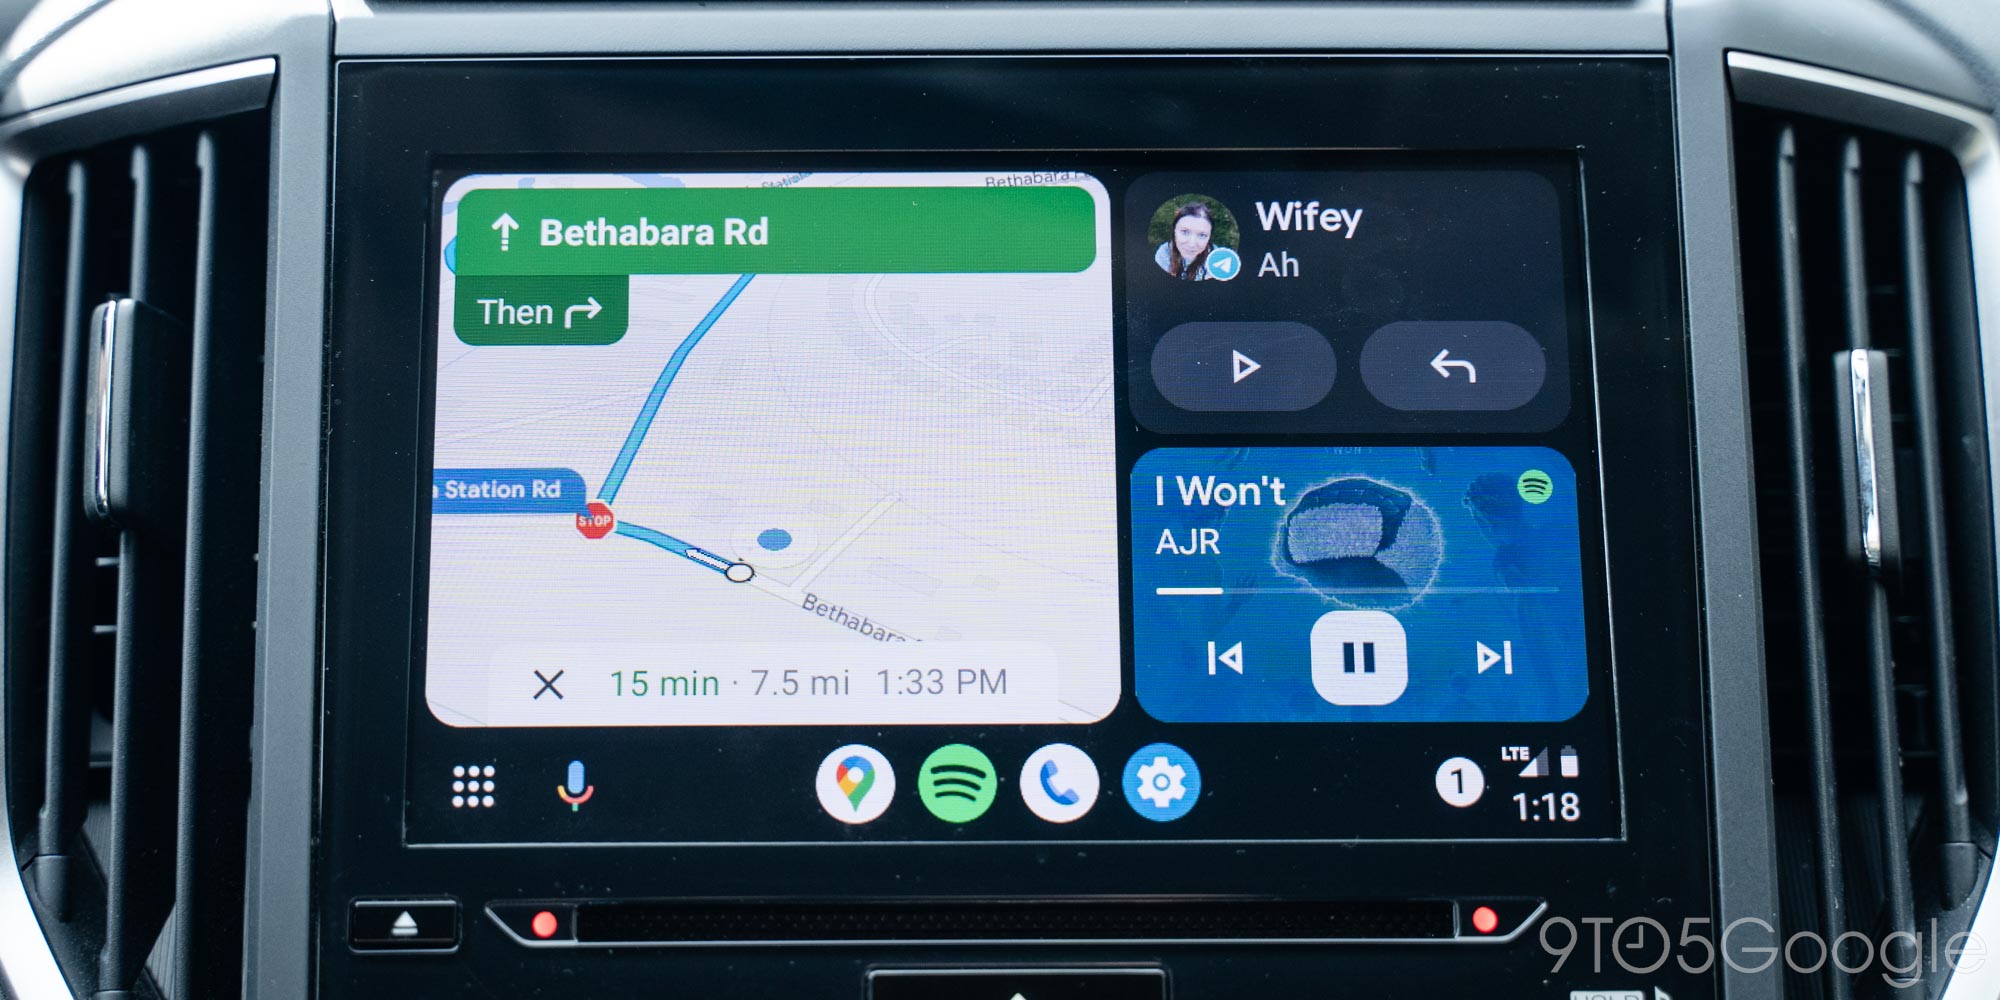 Android Auto Google Maps bug causes navigation to continue